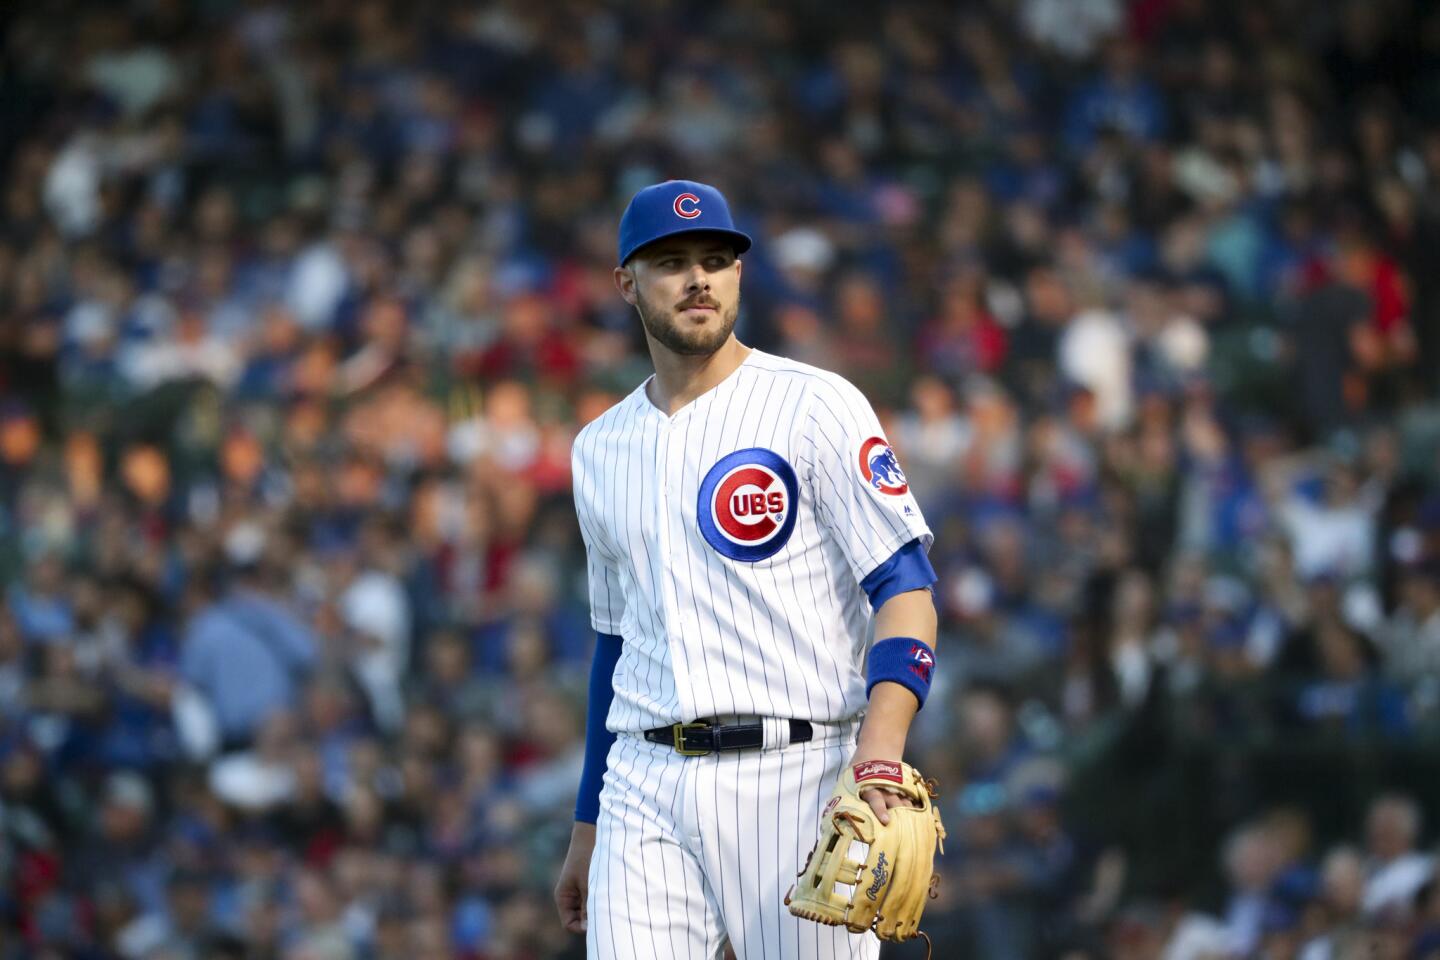 Cubs' Kris Bryant tops MLB in 2015 jersey sales